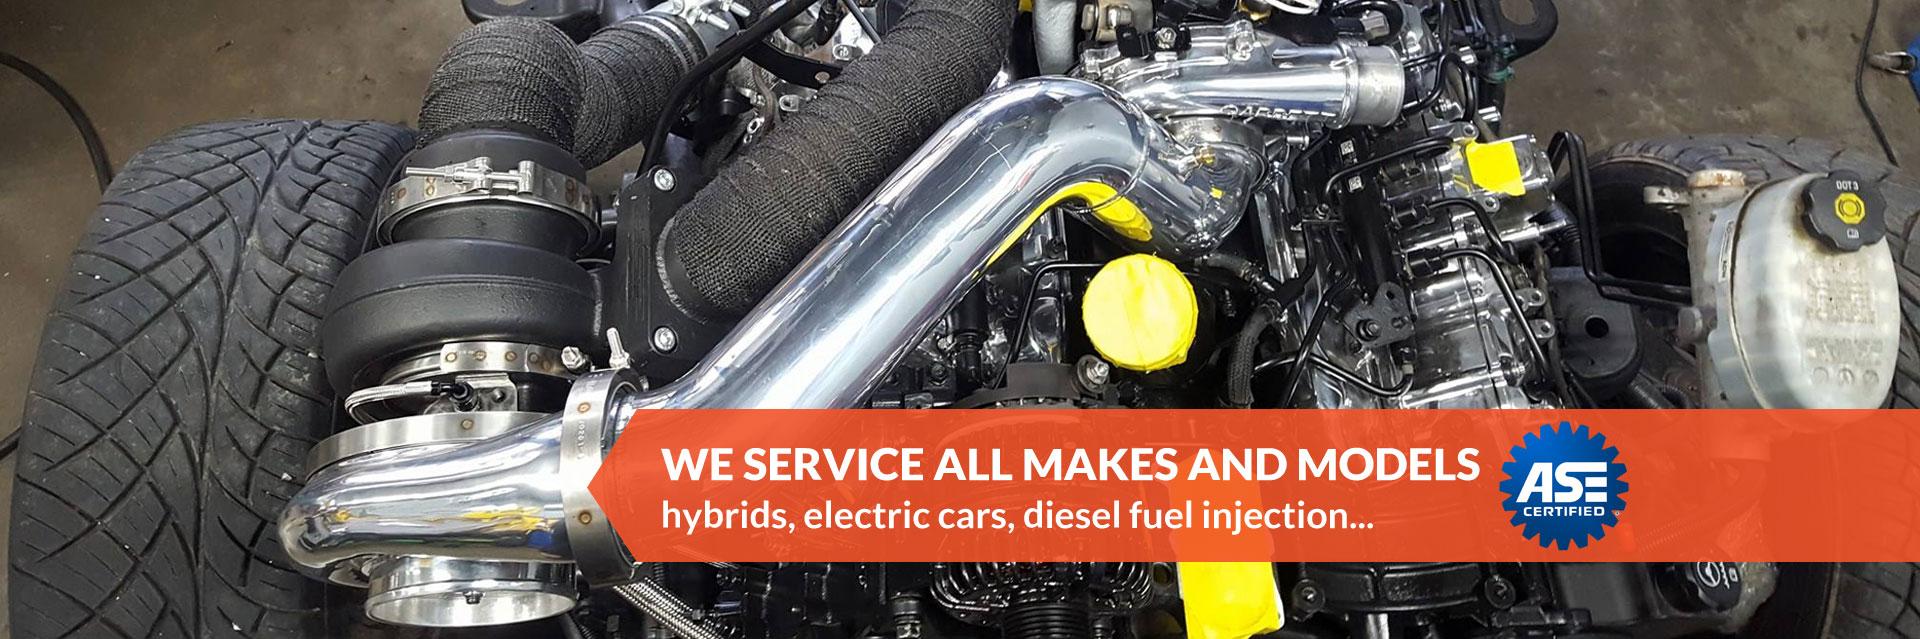 We Service All Makes and Models - hybrids, electric cars, diesel fuel injection